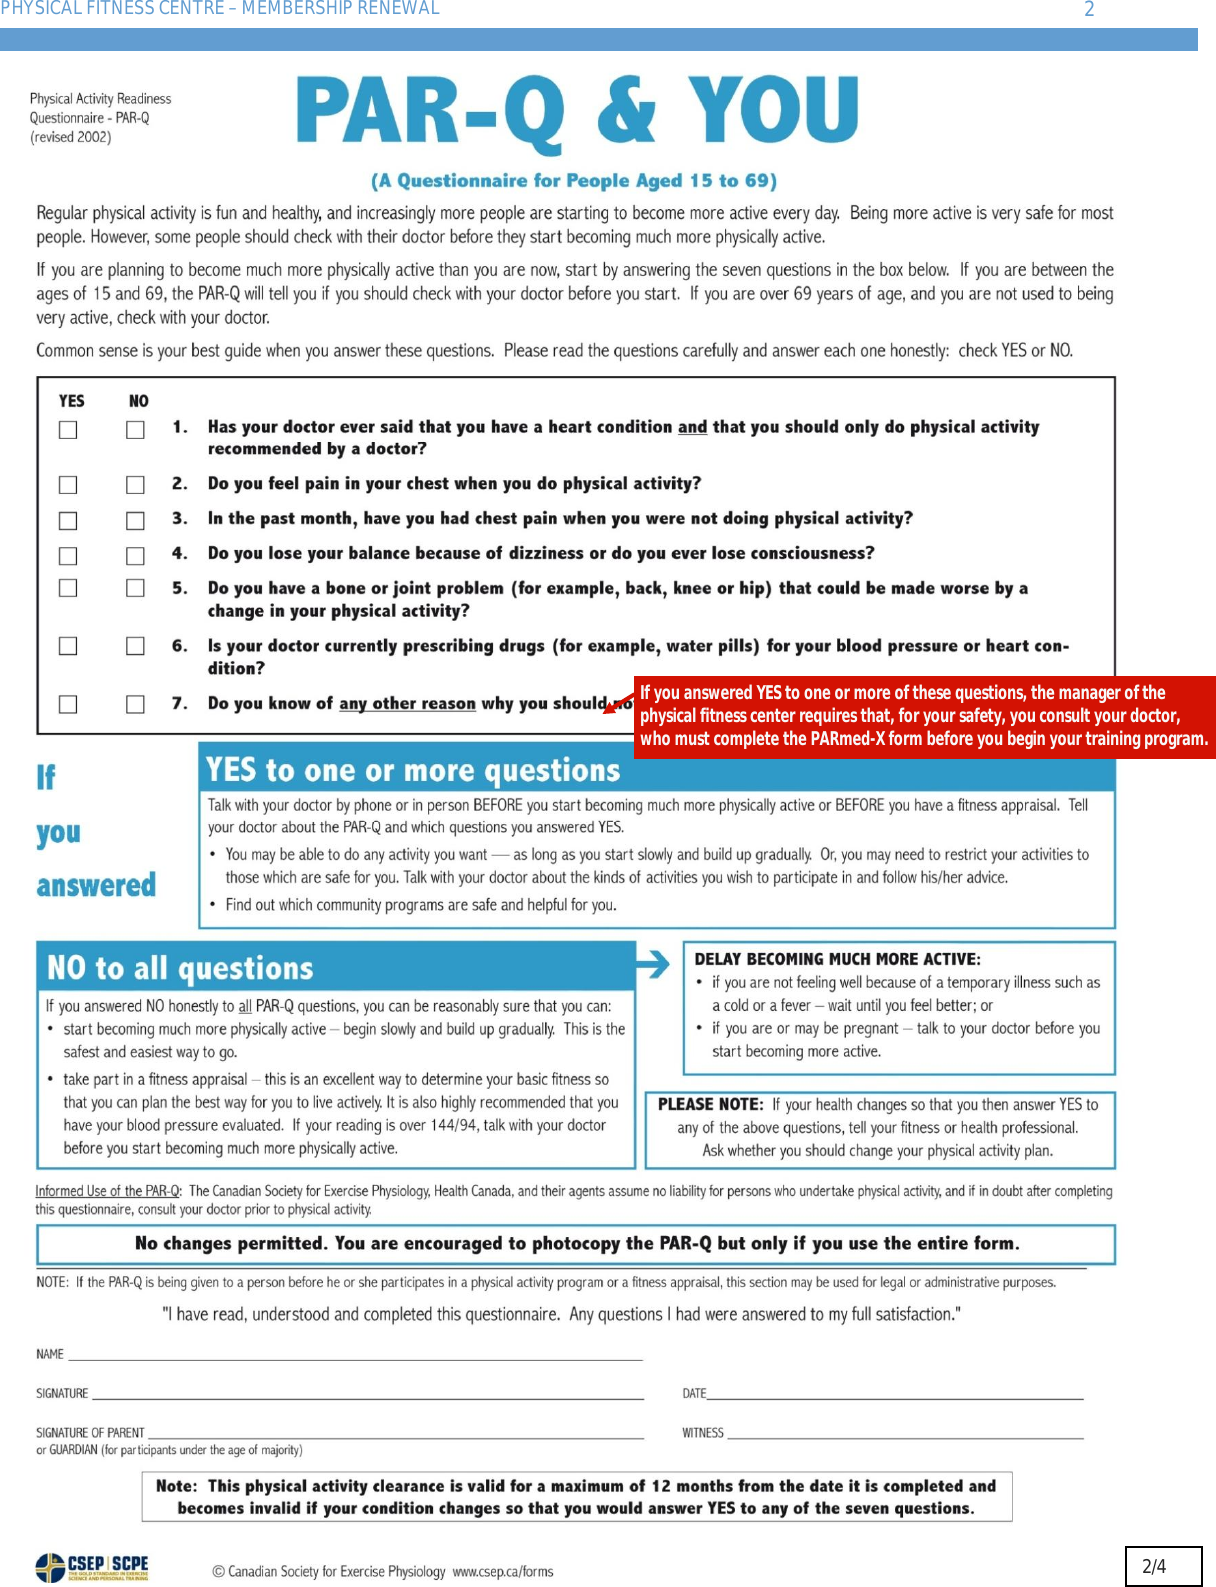 Page 2 of 5 - Renewal Guide English